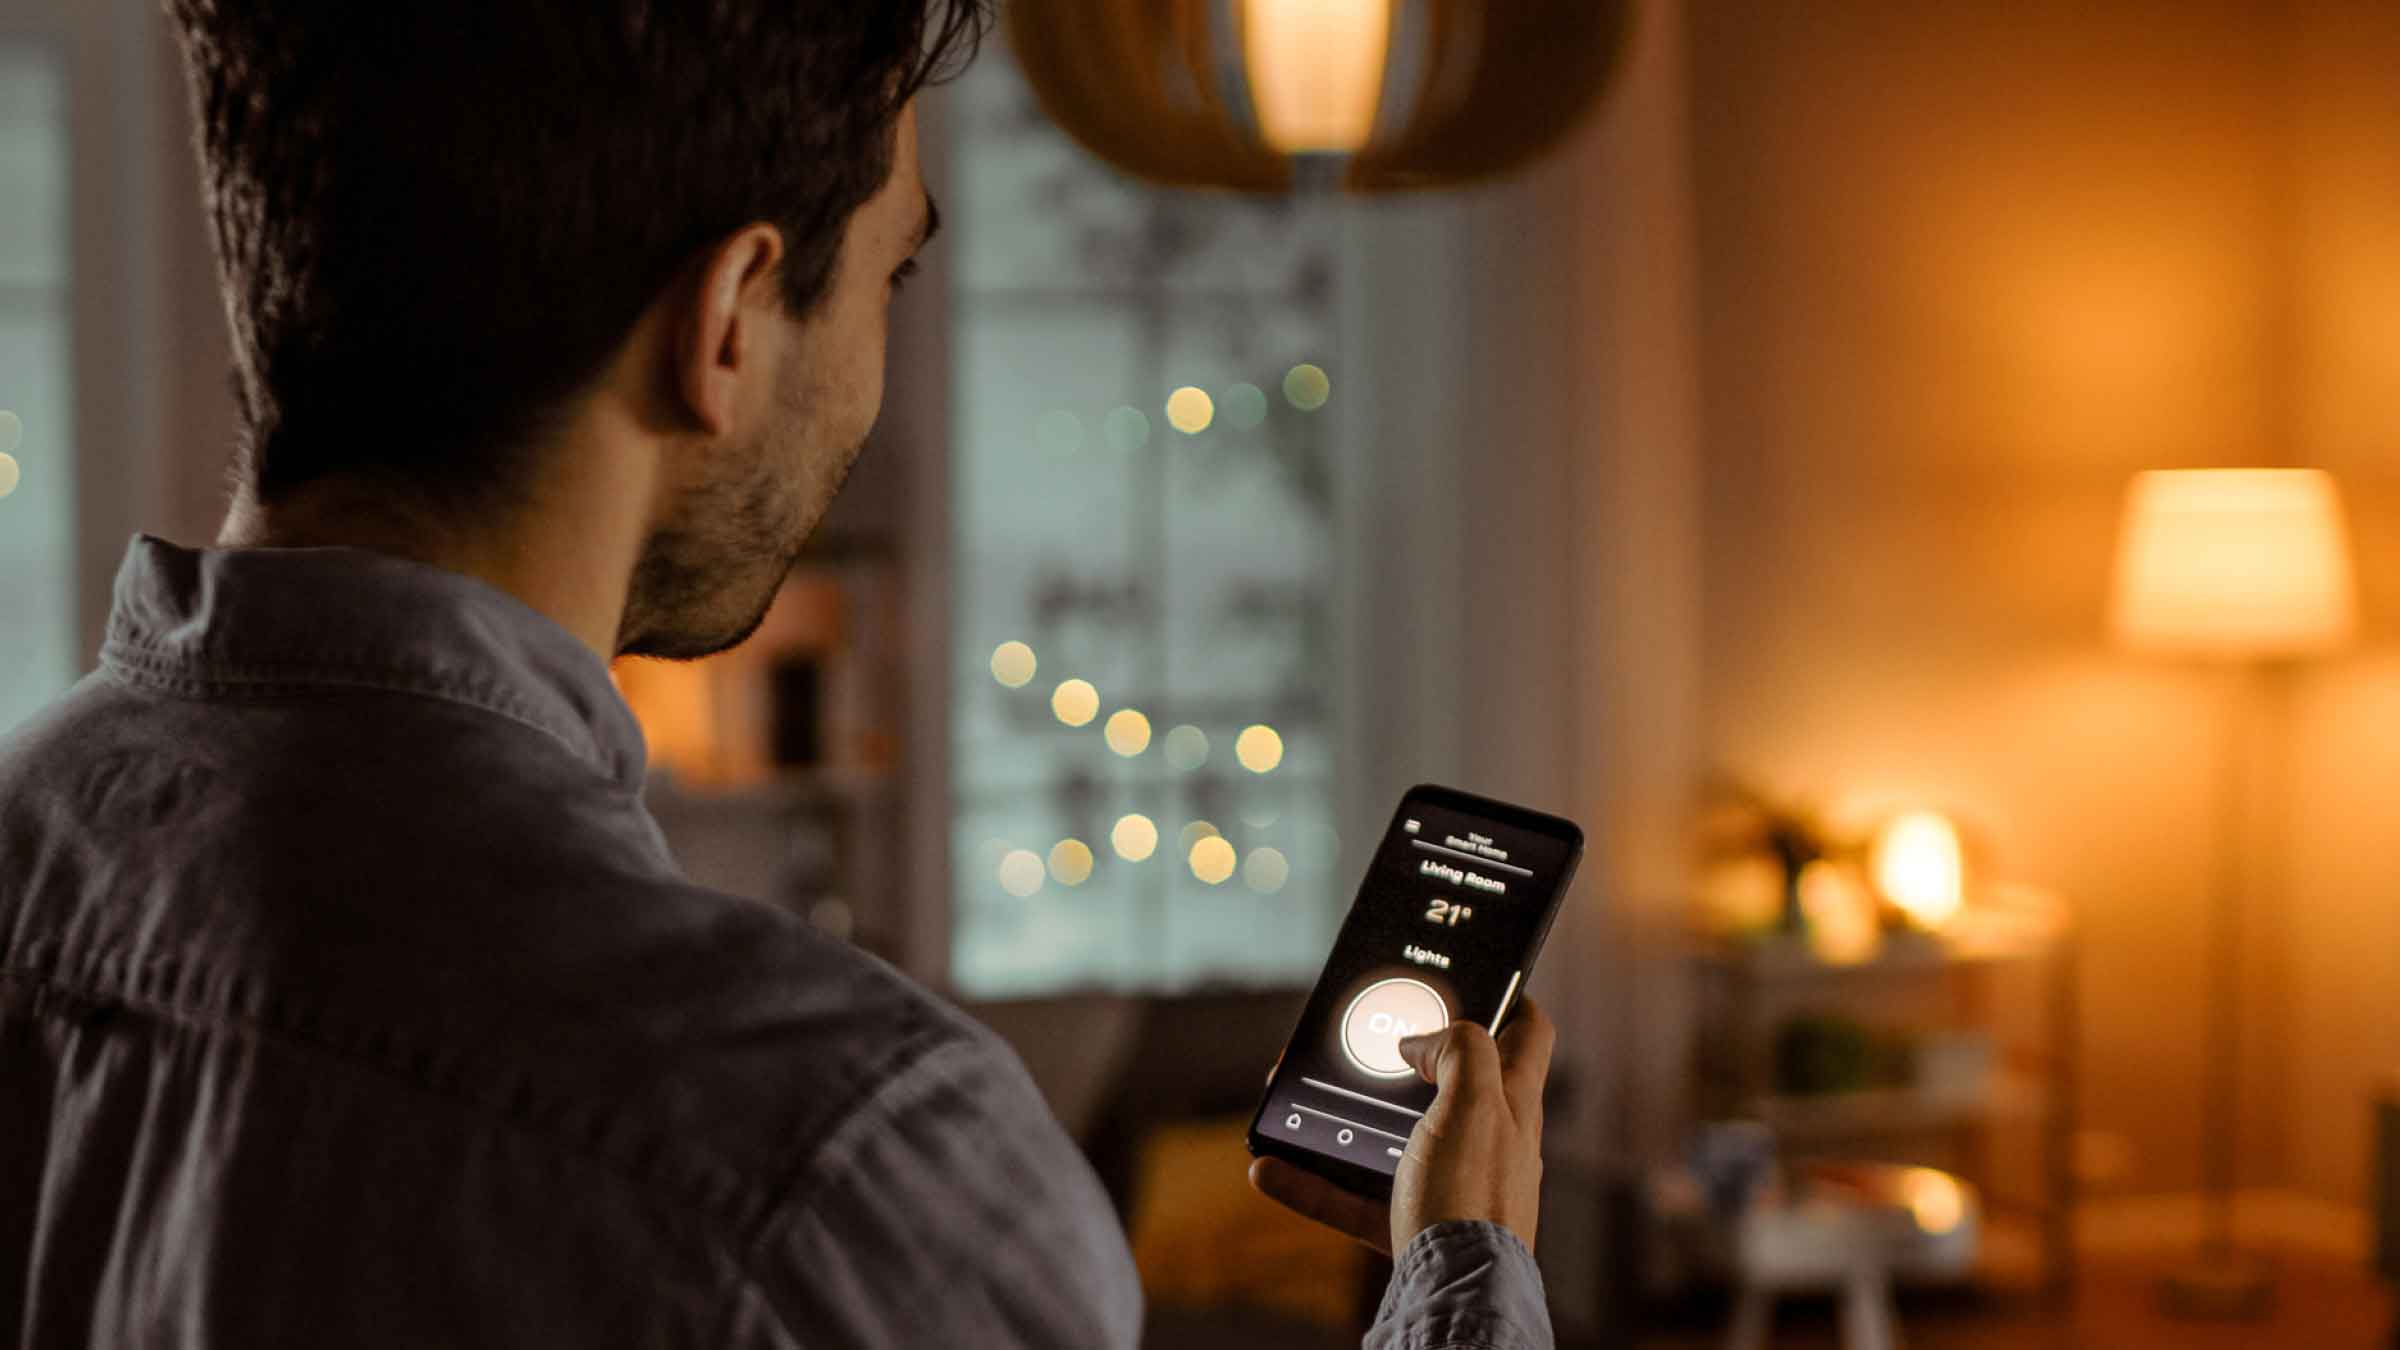 Man holding phone controls the brightness of his living room lights using an app on his phone.